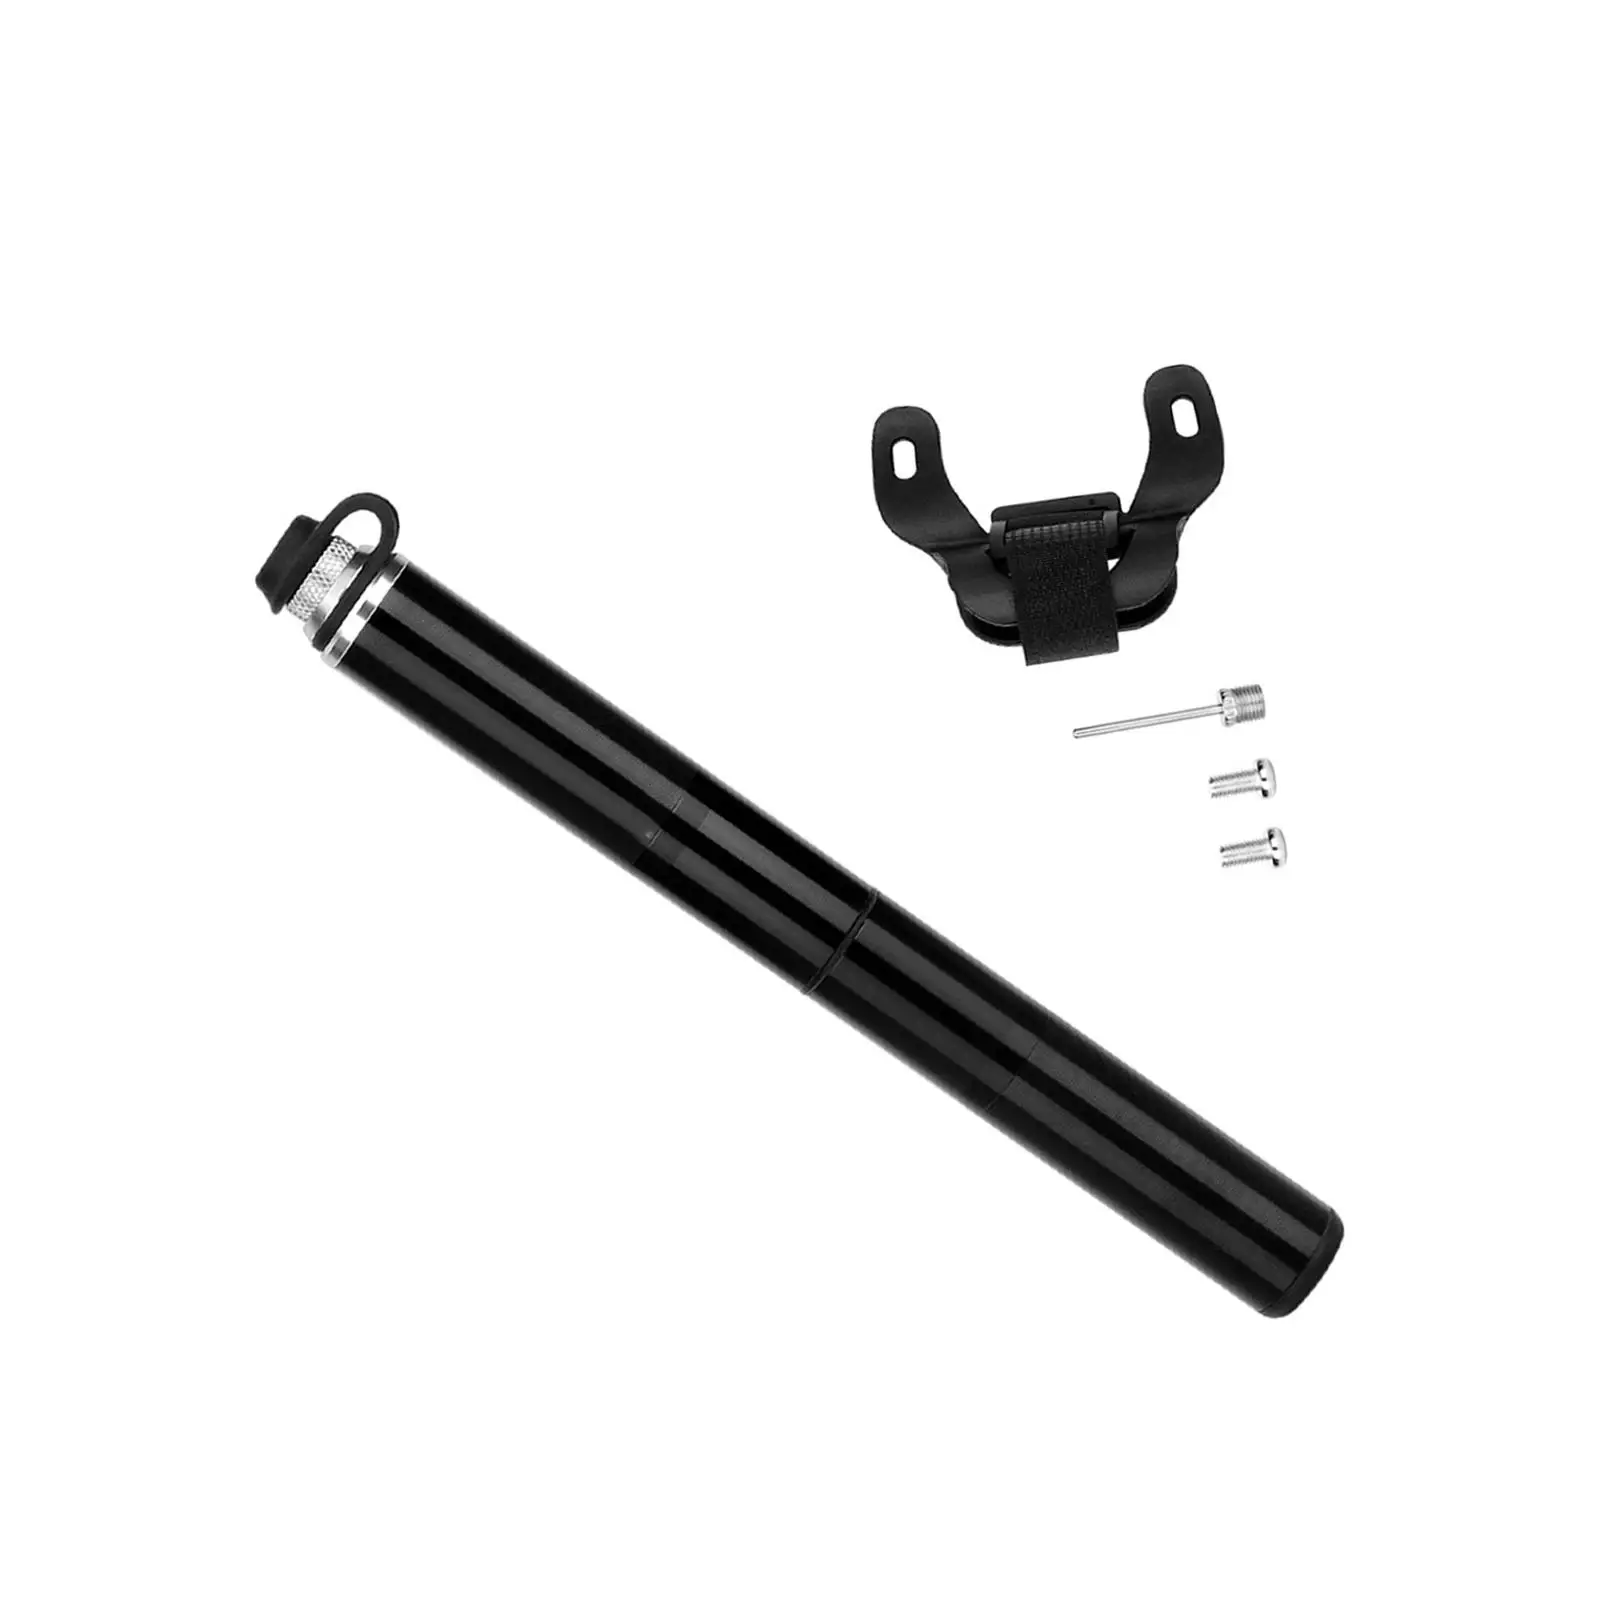 Portable Bike Tire Pump Bicycle Pump Include Mount set Bicycle Pump for Tires air Pump Tire Inflator for Road Bike Balloon